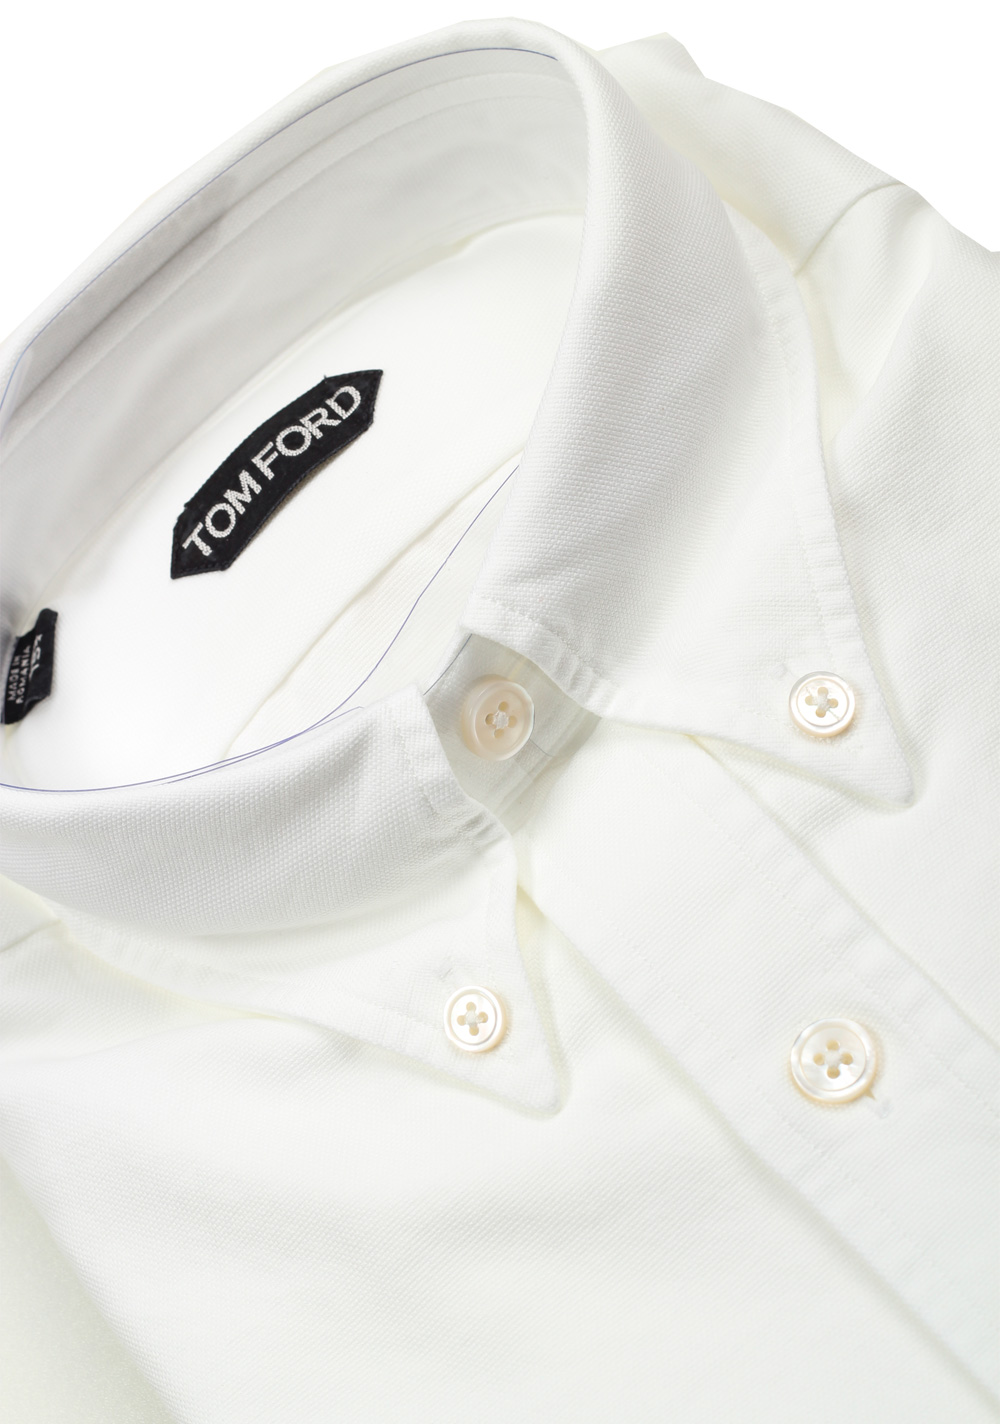 TOM FORD Solid White Casual Button Down Shirt Size 40 / 15,75 U.S. | Costume Limité